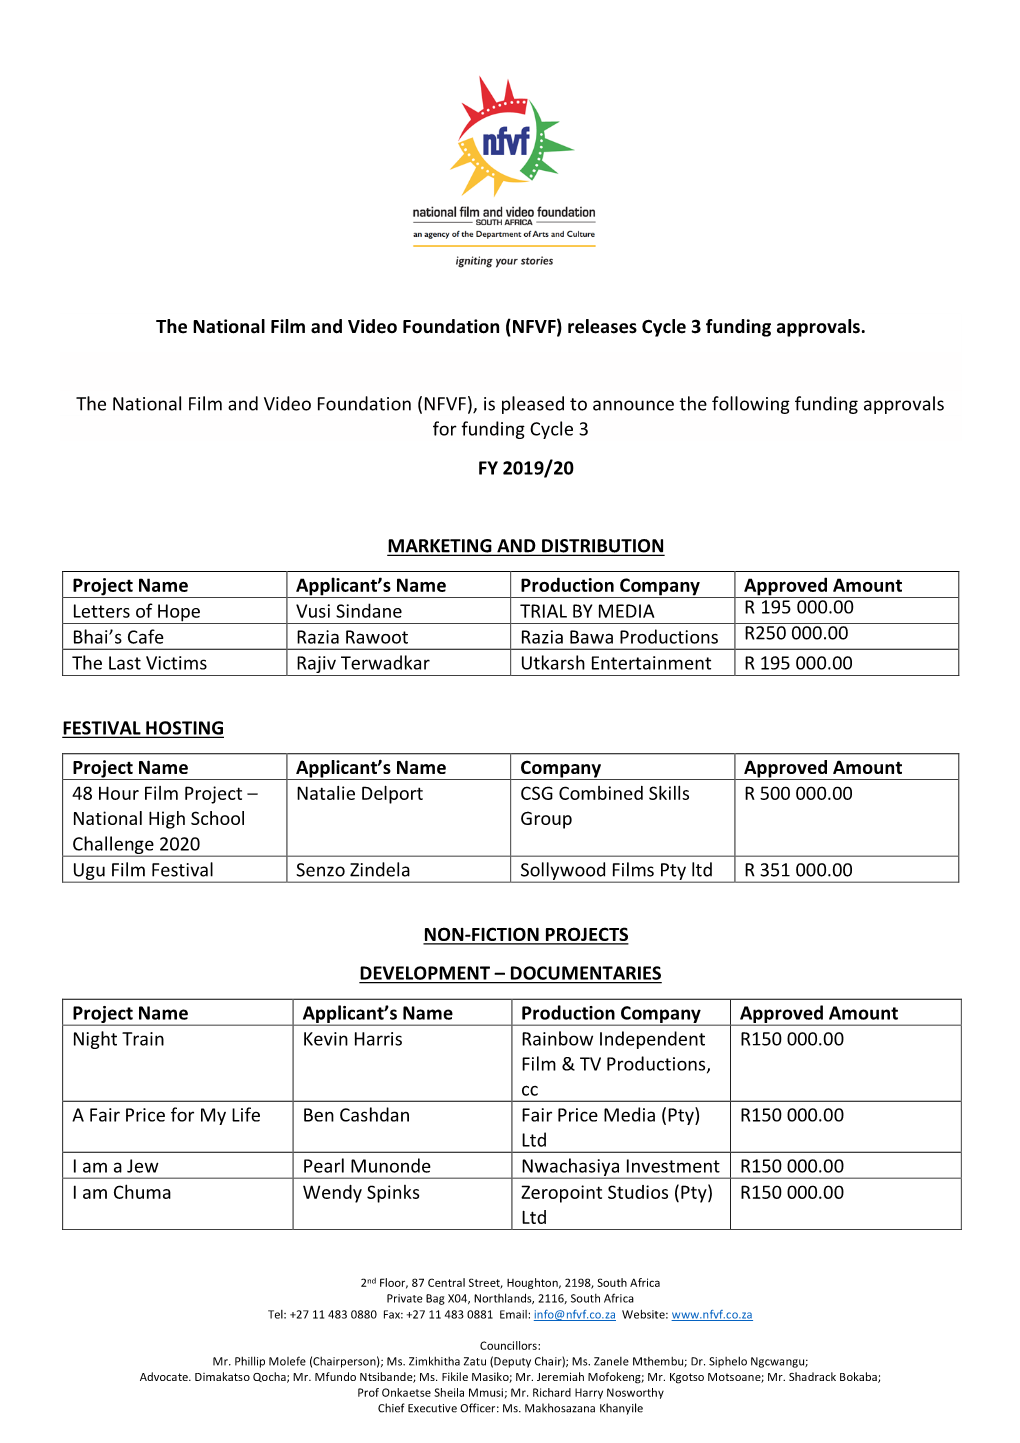 The National Film and Video Foundation (NFVF) Releases Cycle 3 Funding Approvals. the National Film and Video Foundation (NFVF)